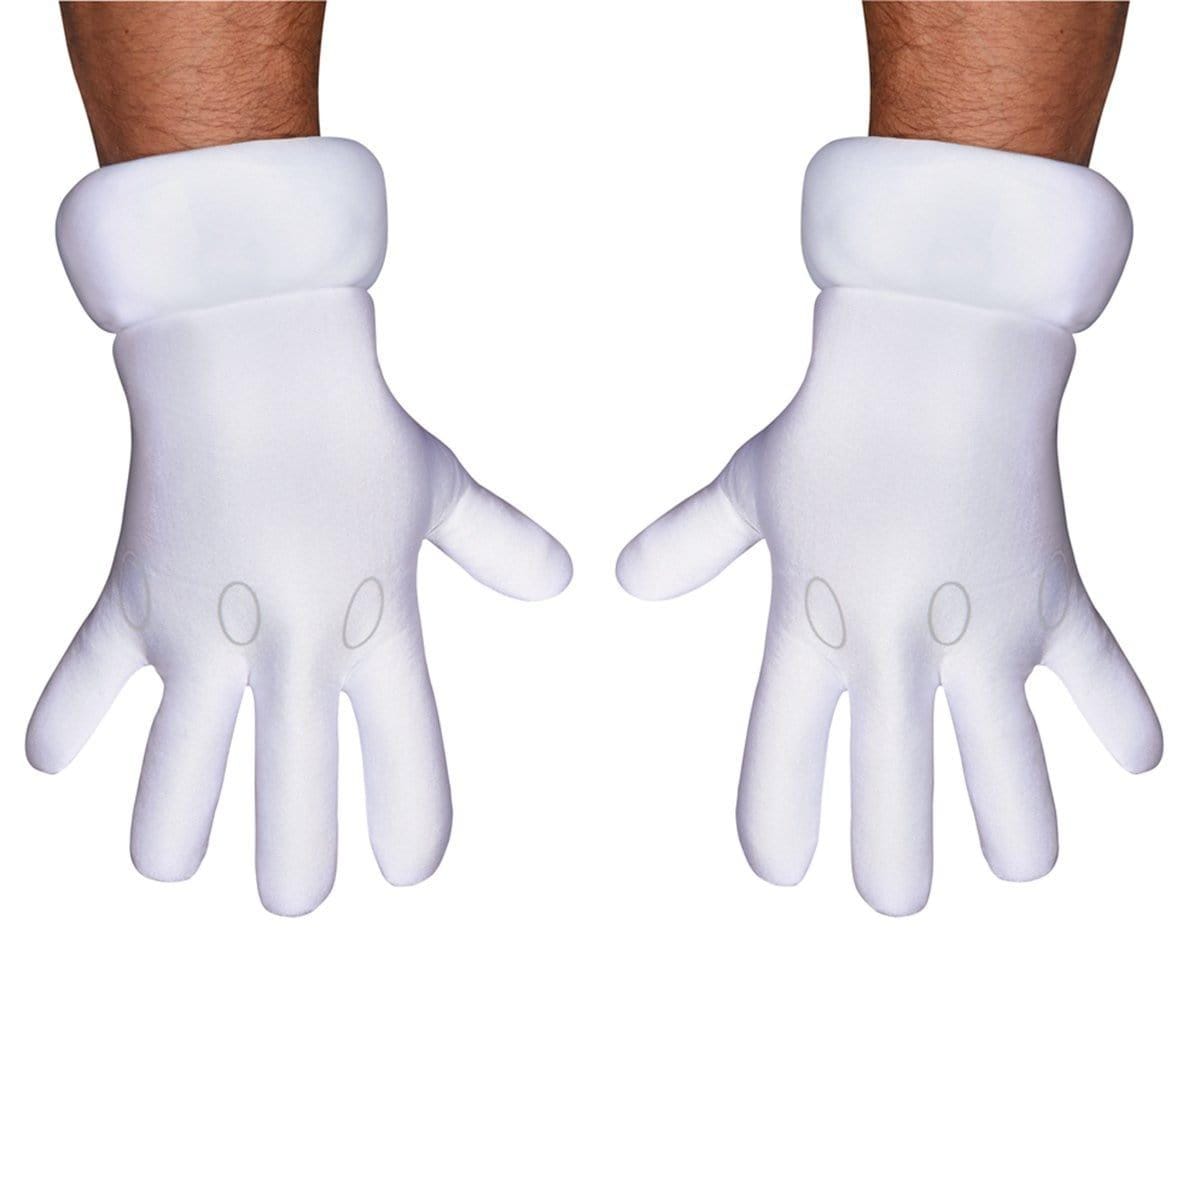 Buy Costume Accessories Mario gloves for adults, Super Mario Bros. sold at Party Expert